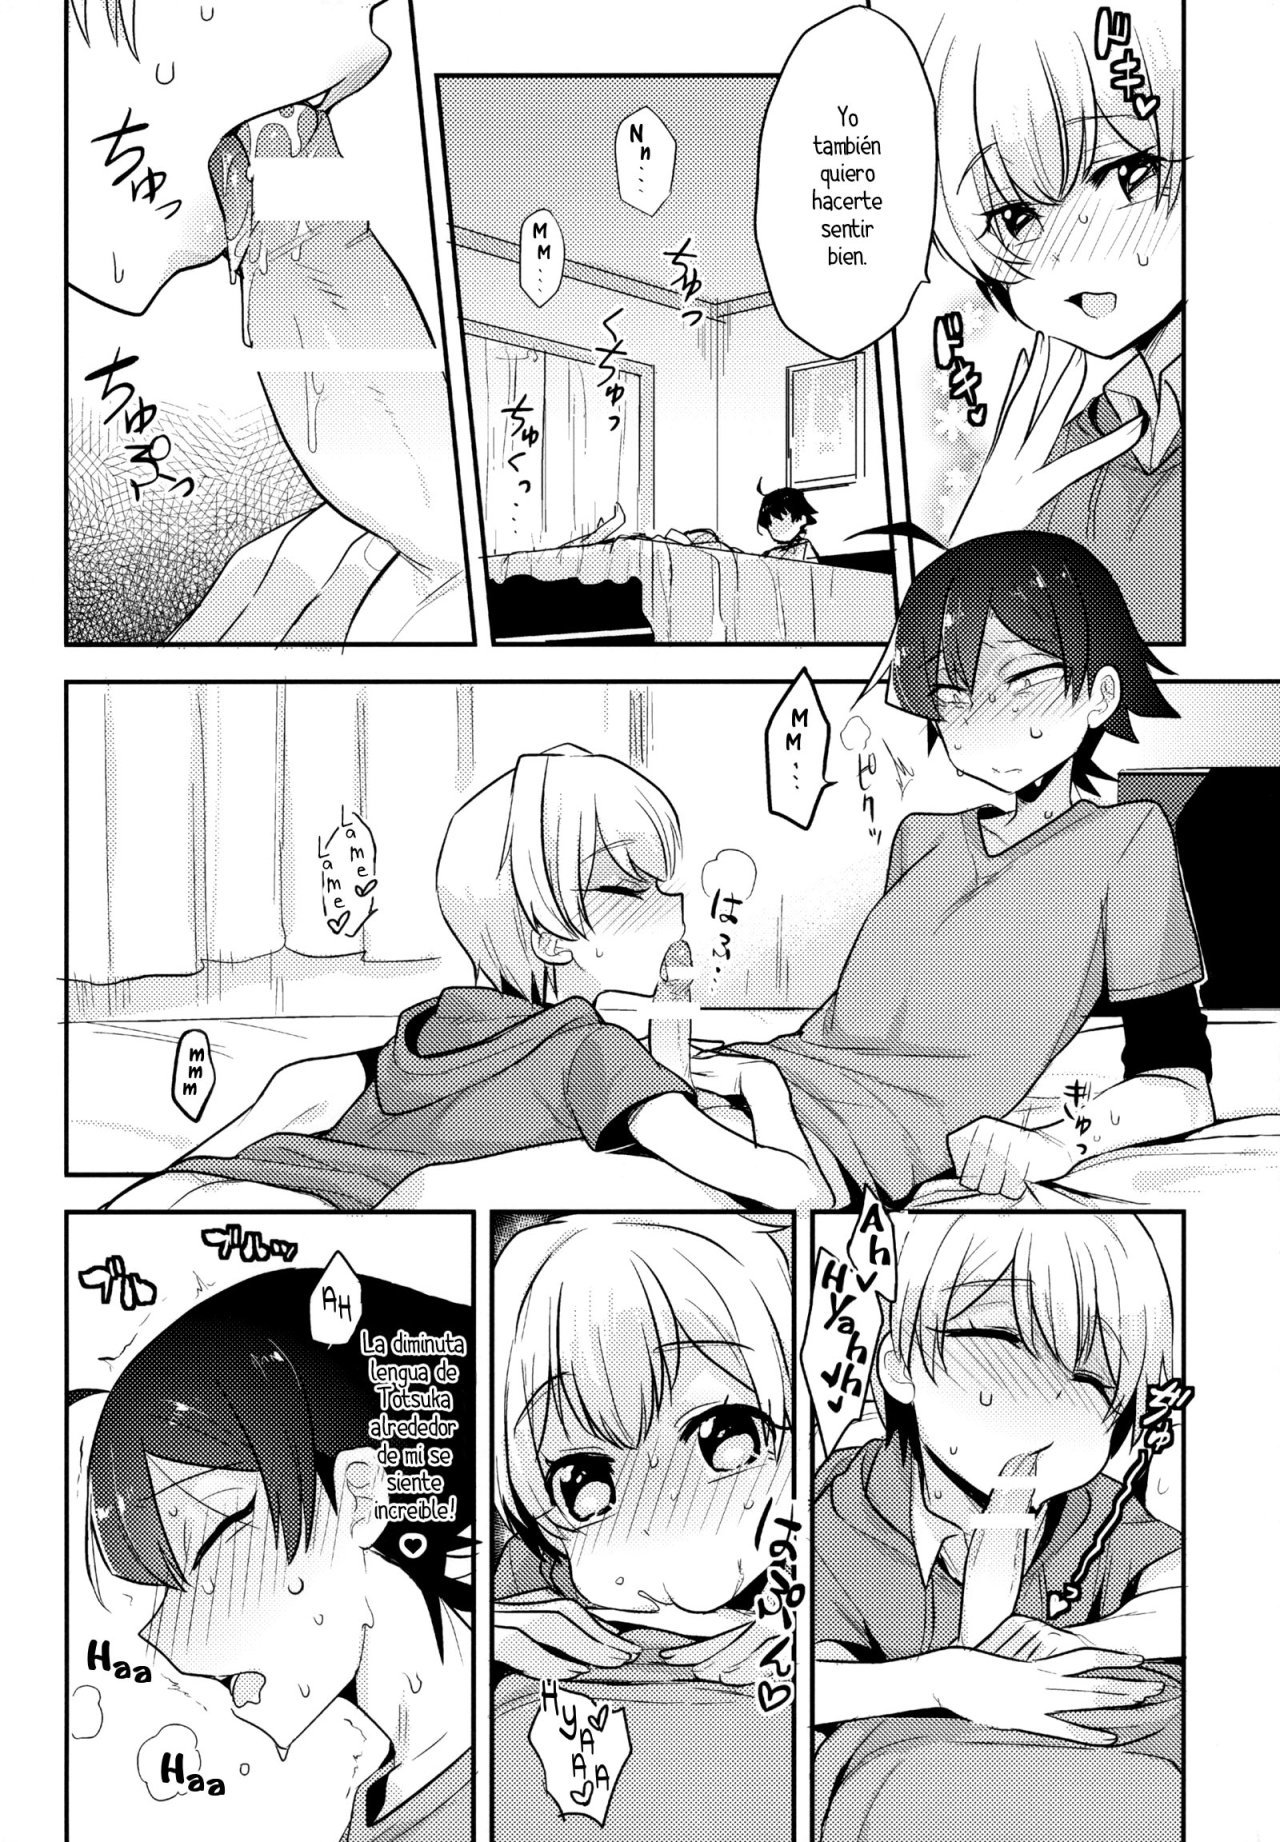 Cute Angel Totsuka Turns Hachiman Into His Bitch With His Elephant Cock - extra 2 - 10